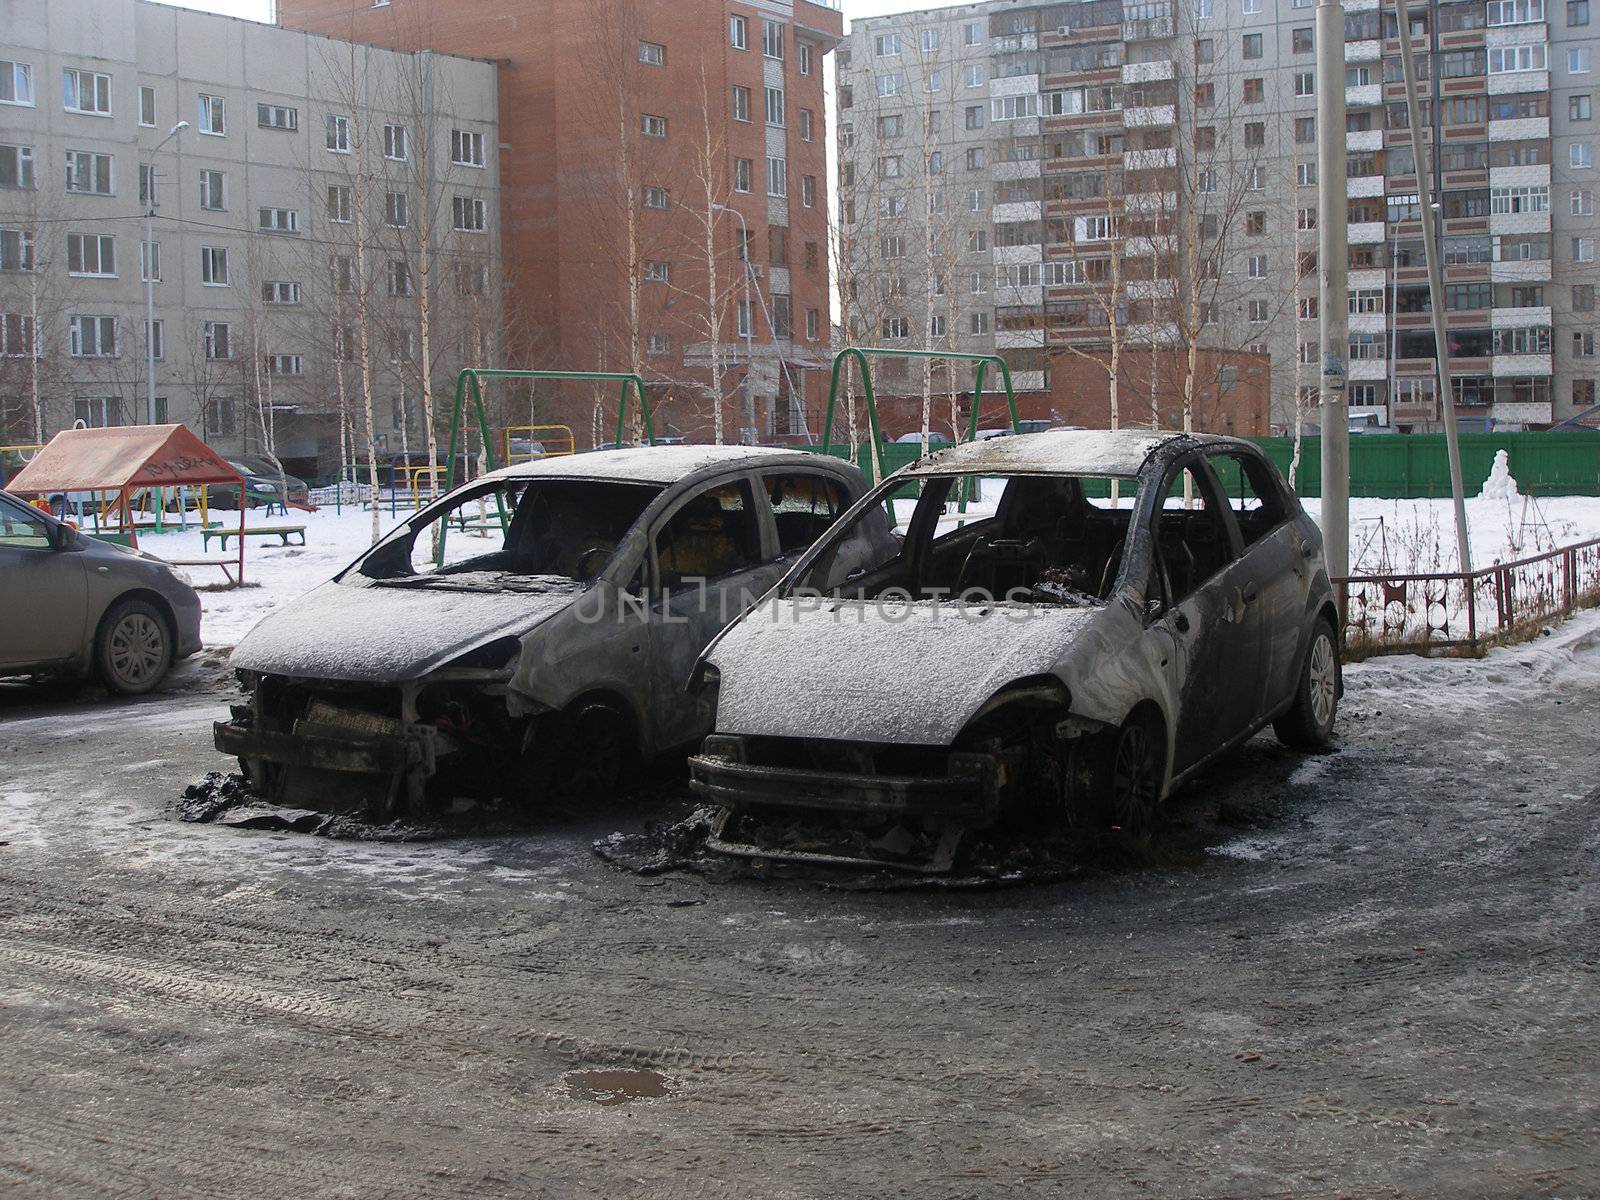 Have burnt down cars by veronka72